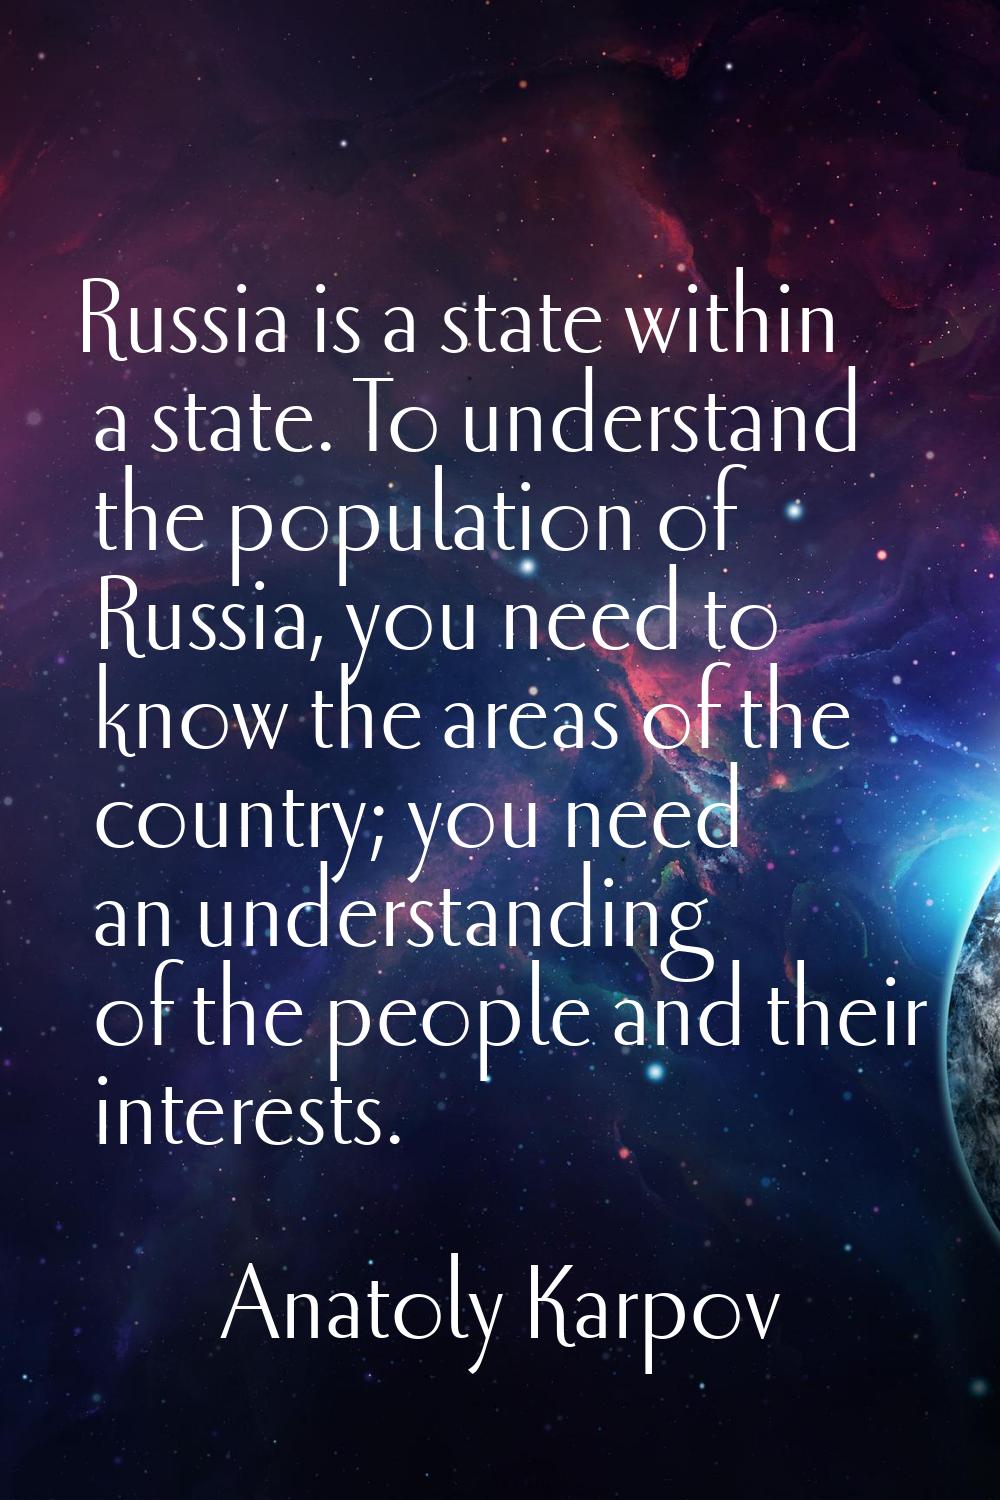 Russia is a state within a state. To understand the population of Russia, you need to know the area